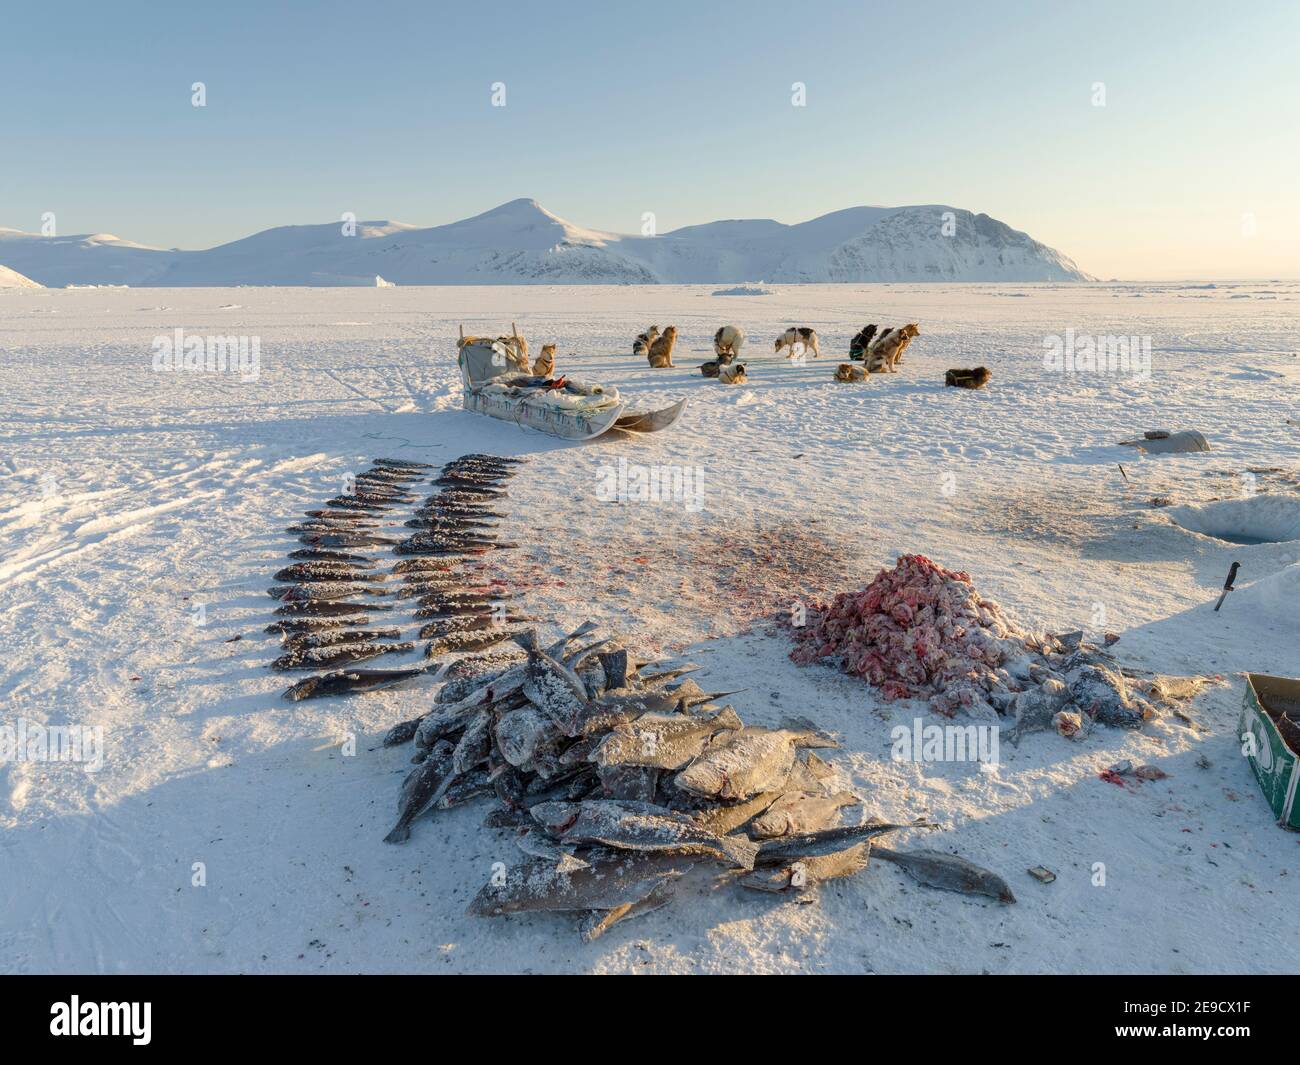 Fisherman with caught halibut on the sea ice of the frozen Melville Bay, part of  Baffin Bay, near Kullorsuaq. America, North America, Greenland, Dani Stock Photo